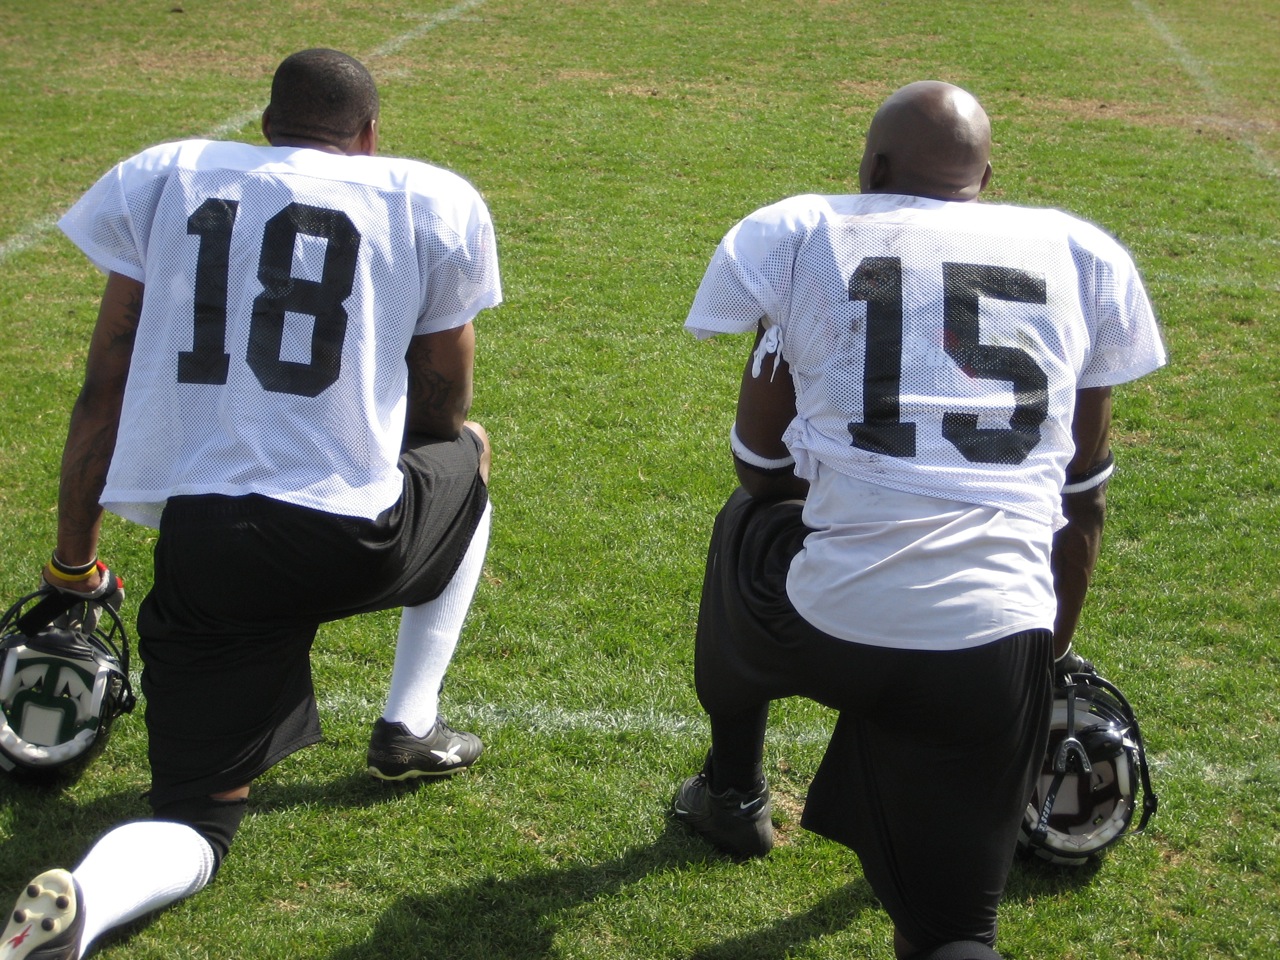 two black men standing on grass while one is holding a helmet